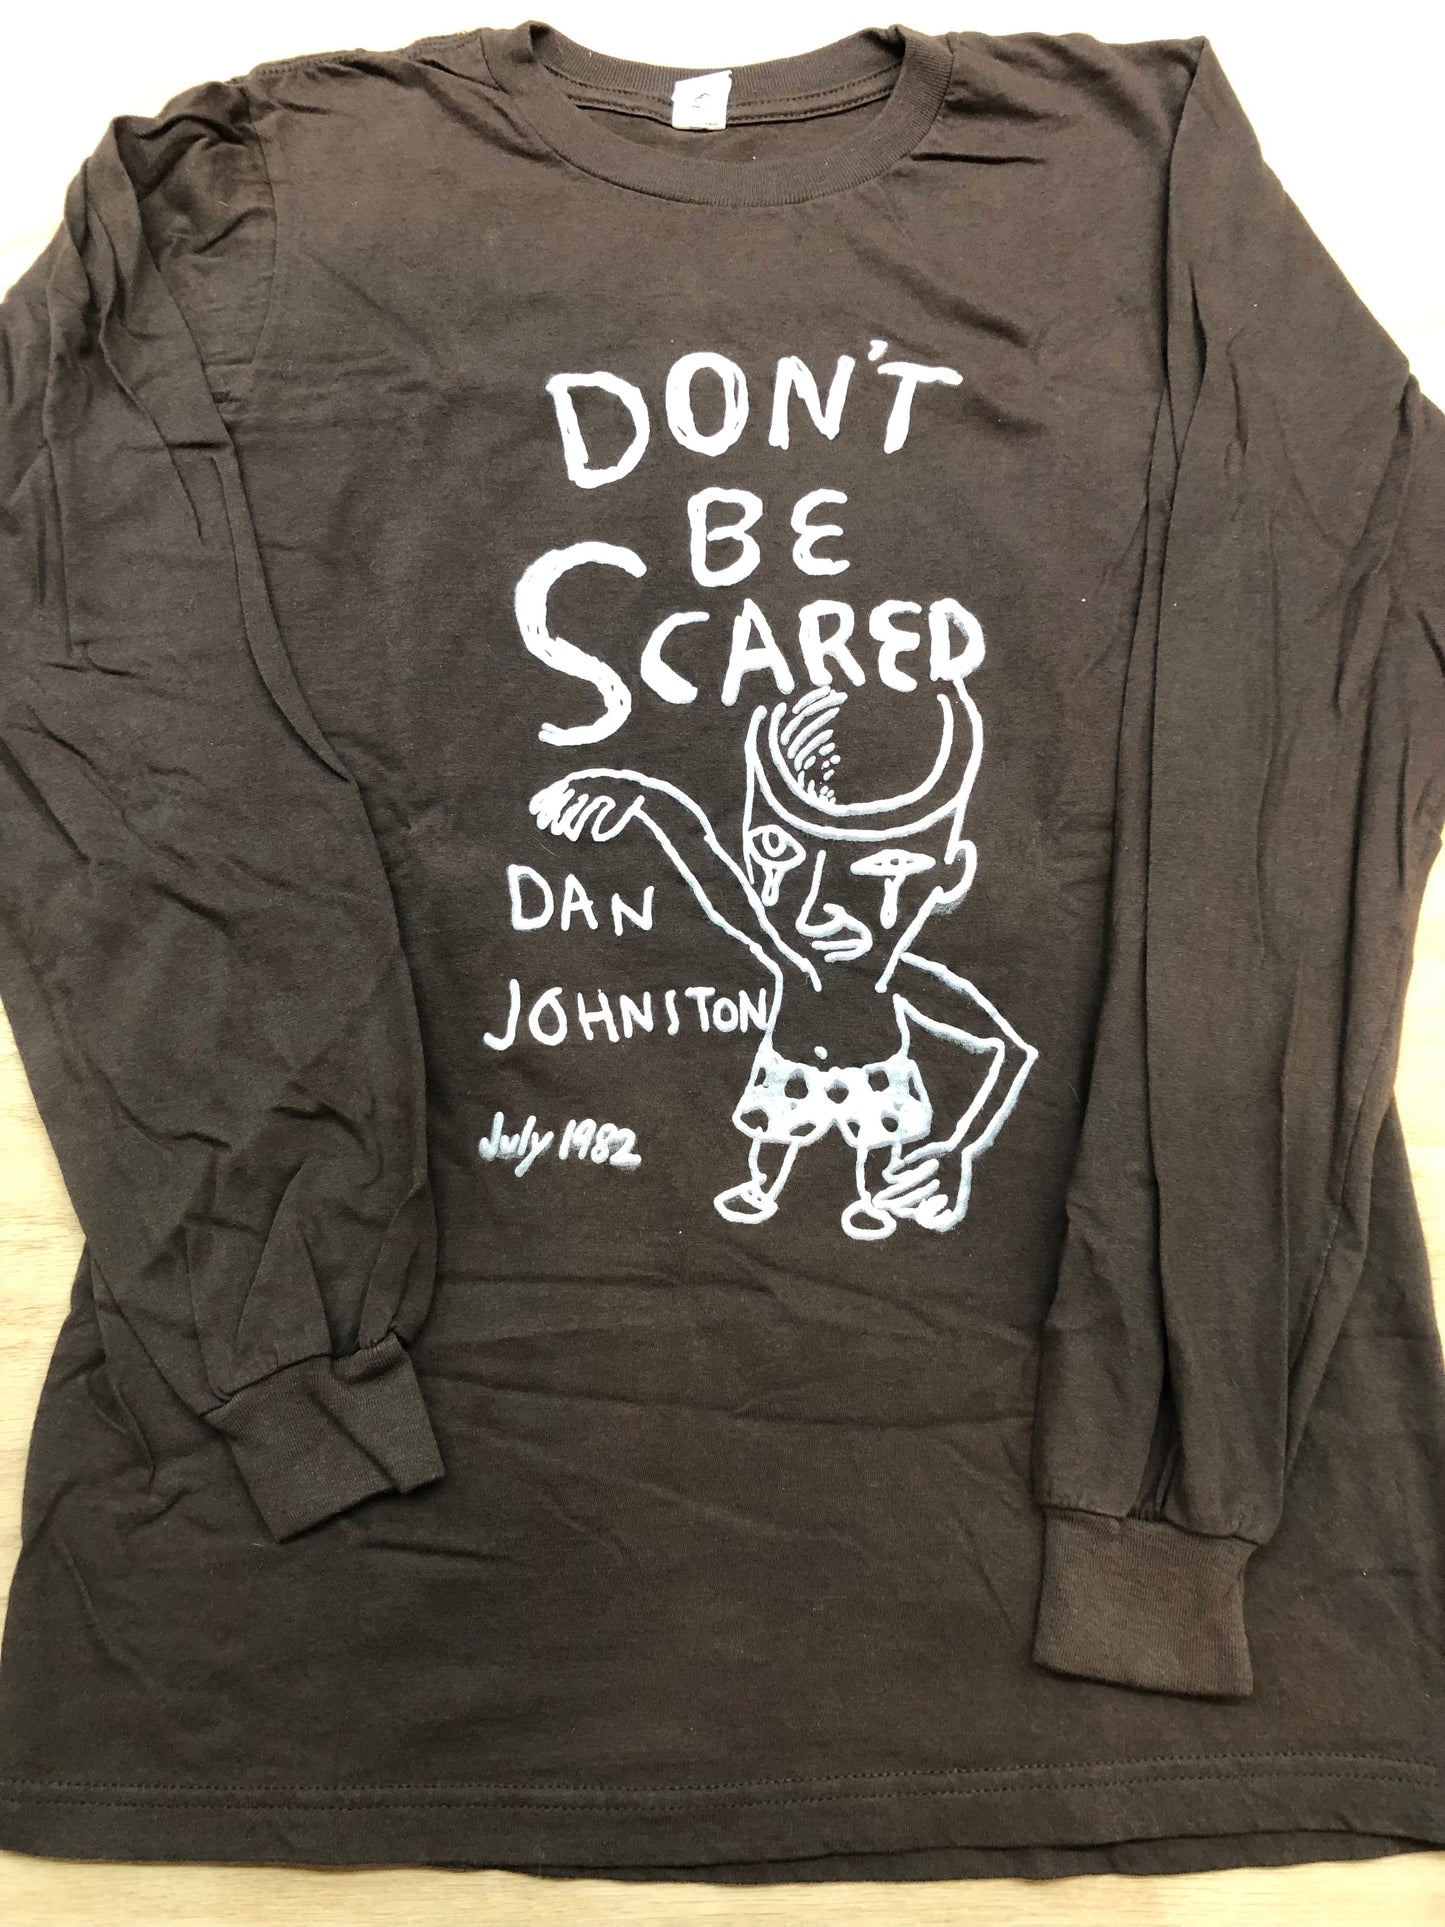 Don't Be Scared brown long sleeve tee